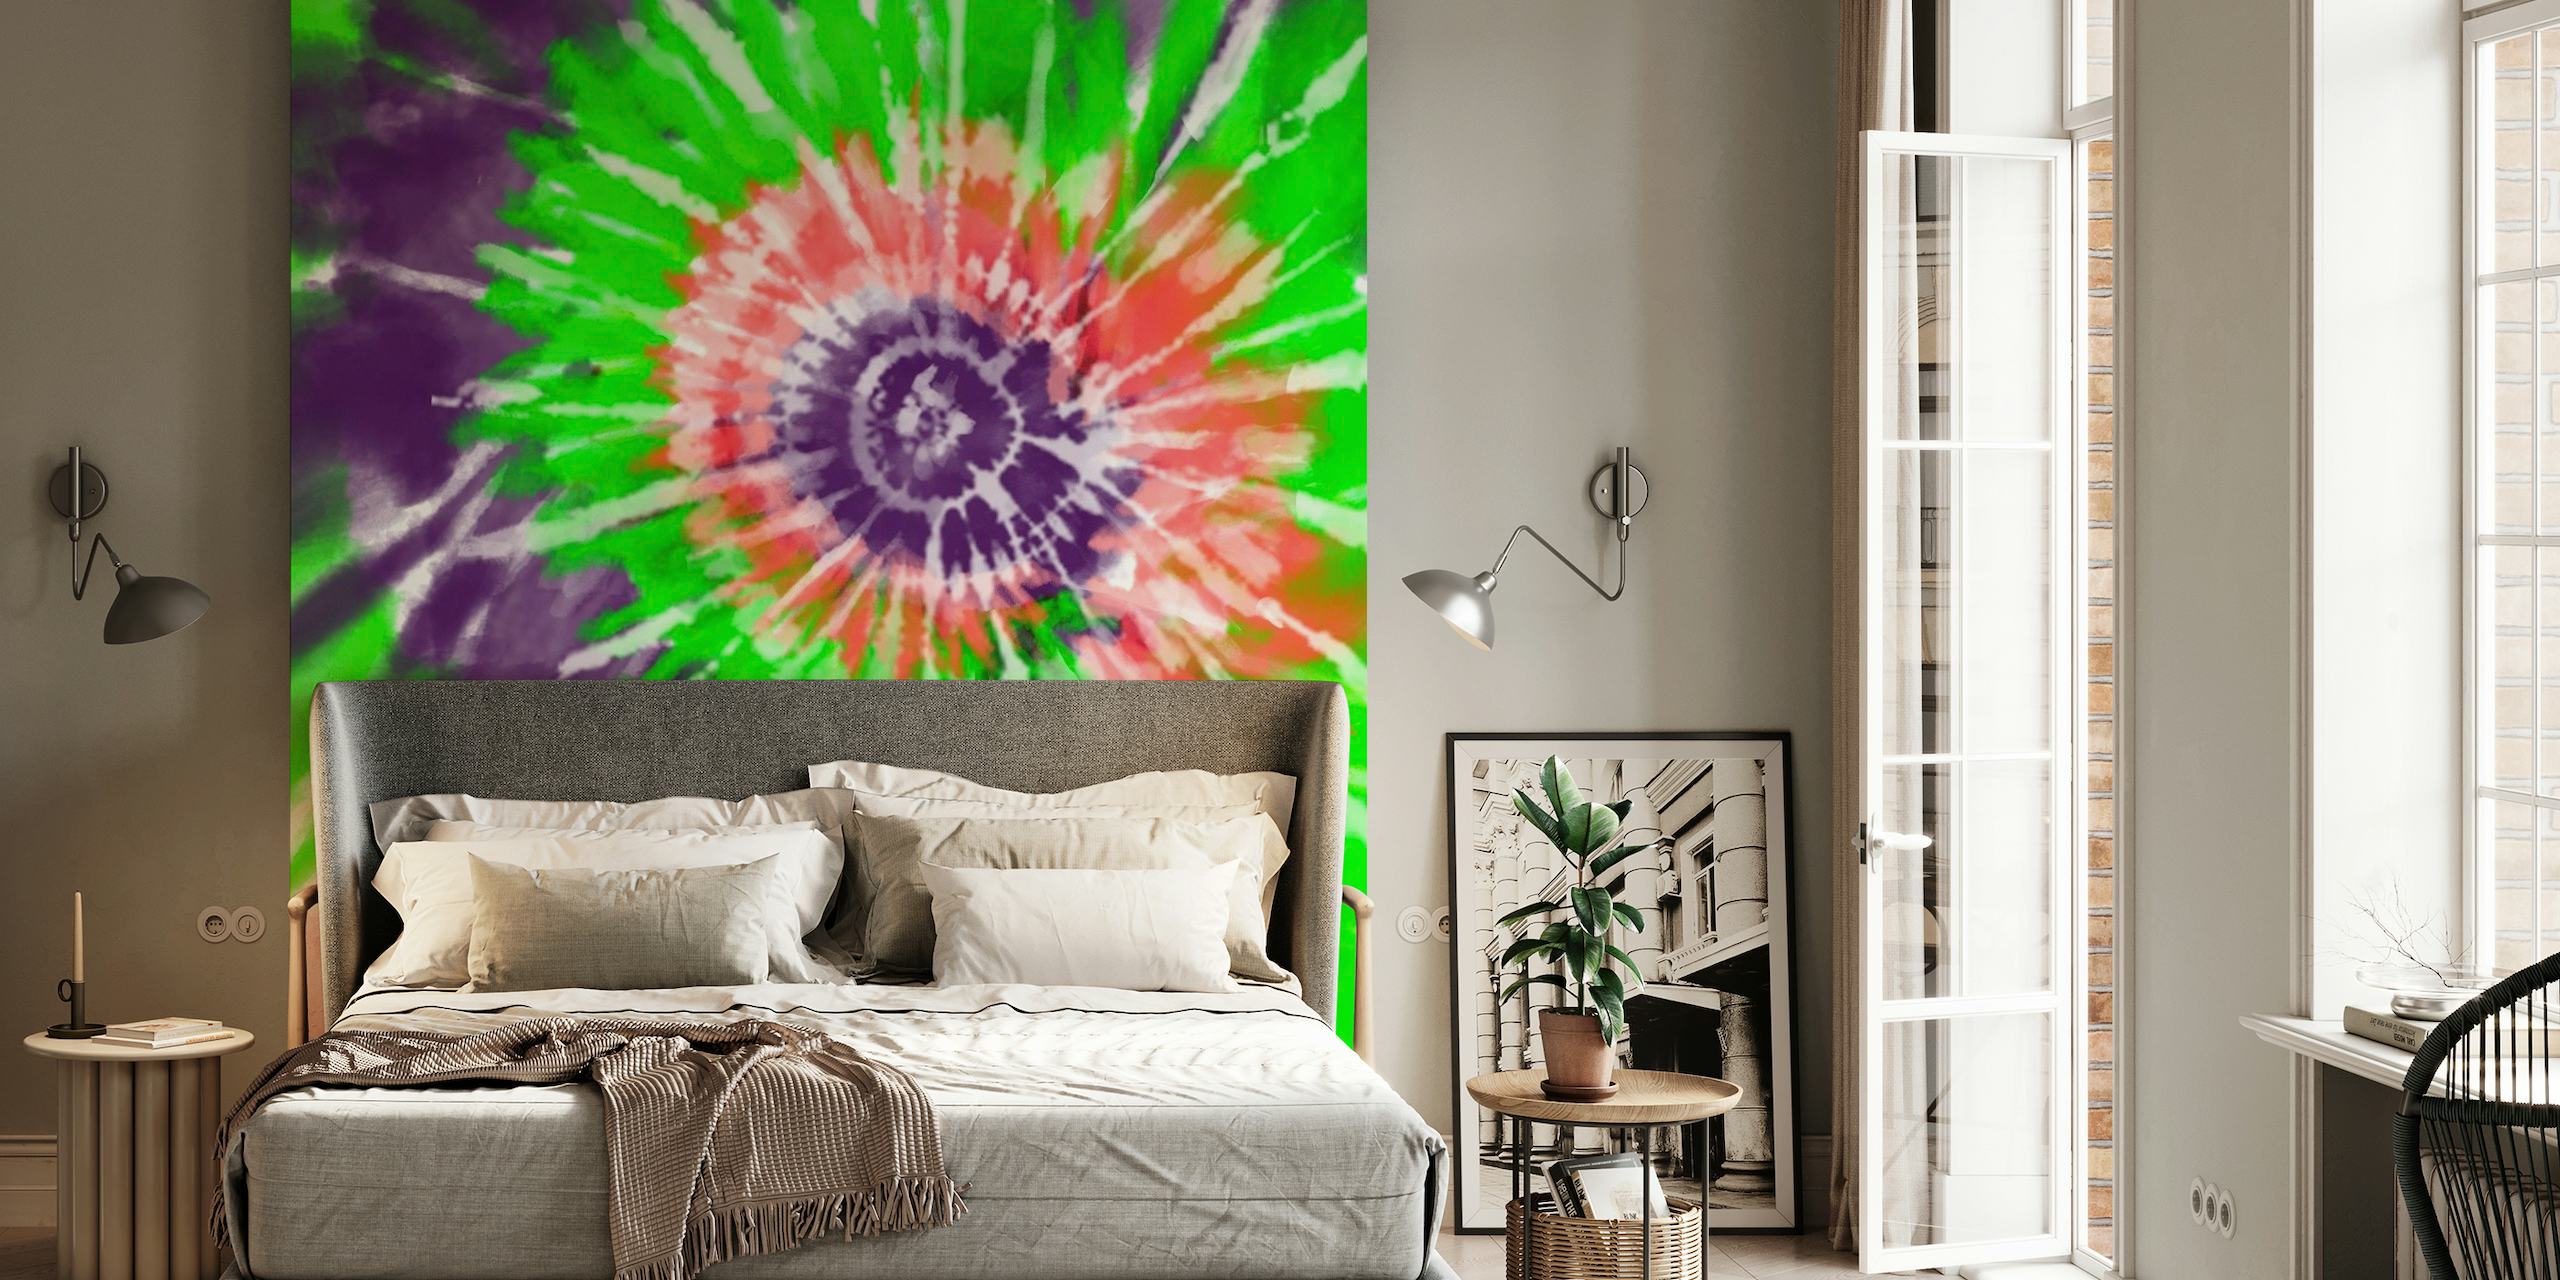 Colorful tie-dye wall mural with light green, pink, and dark green swirls